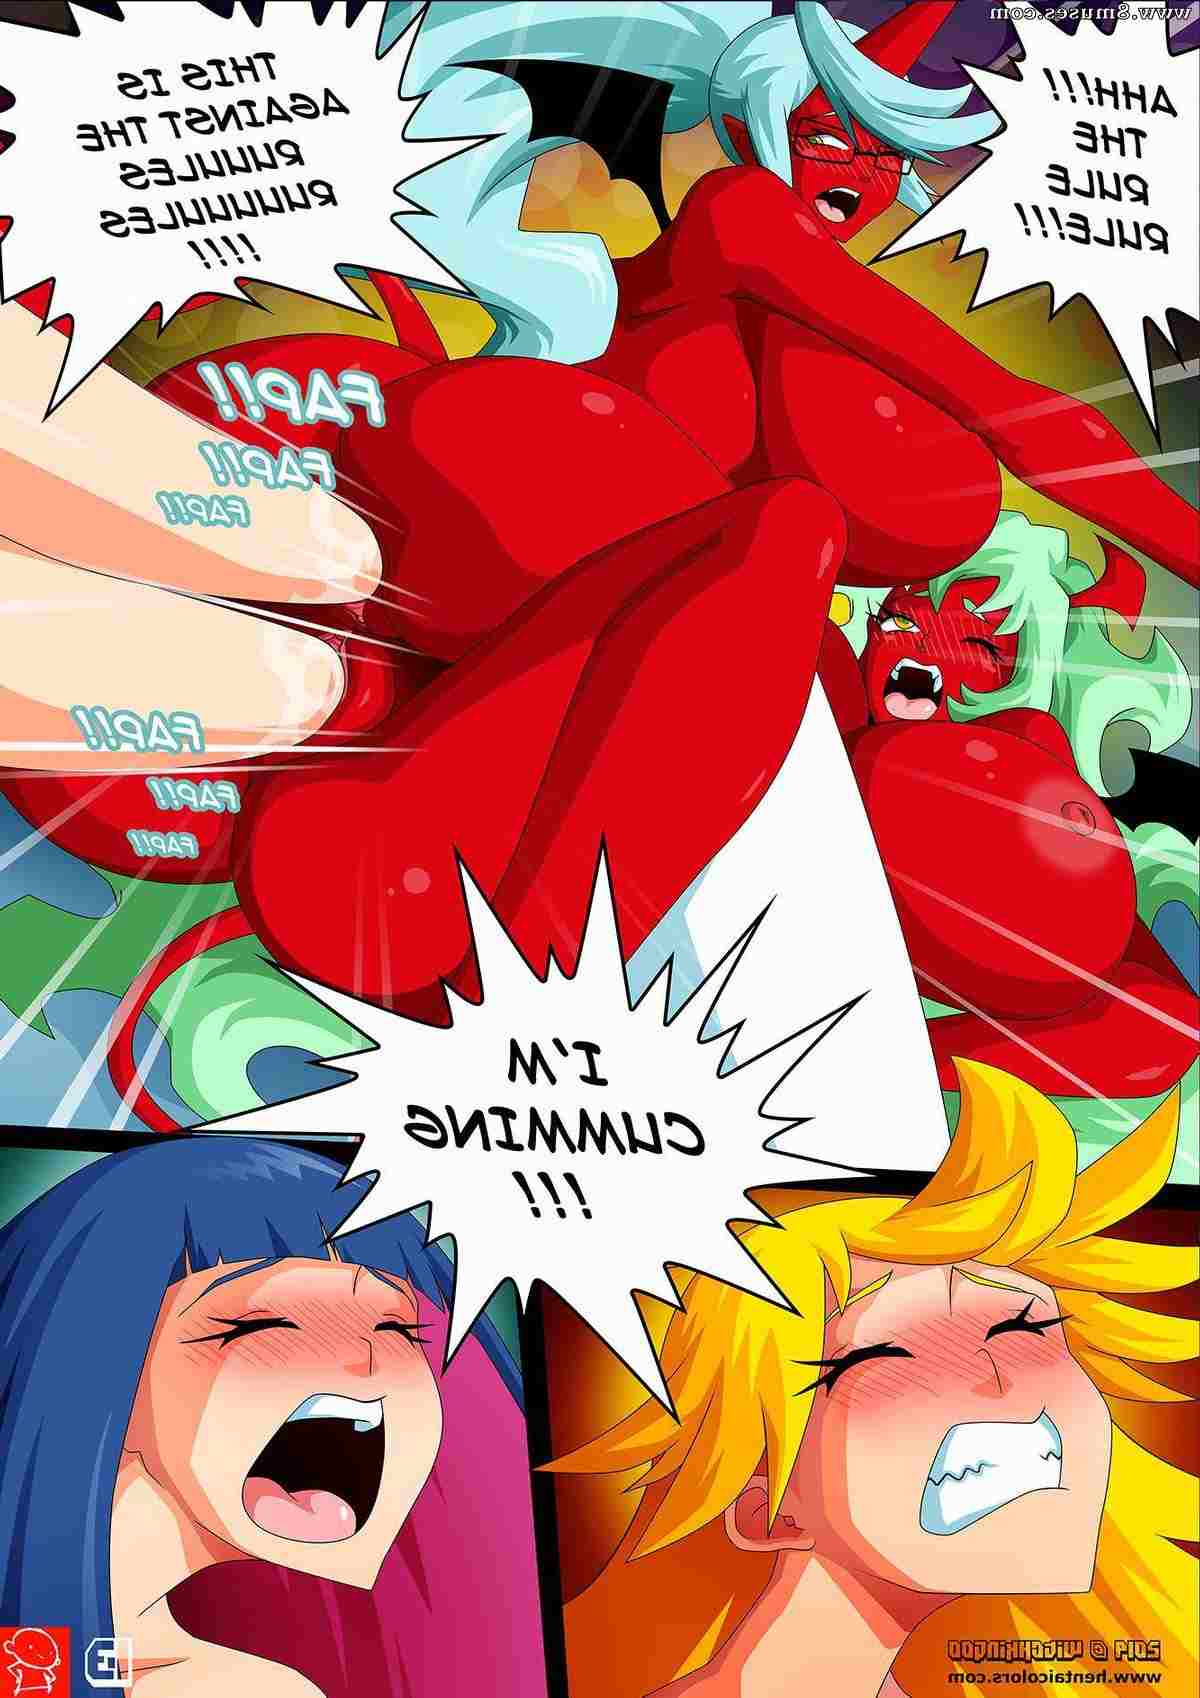 Witchking00-Comics/Panty-and-Stocking-Angels-vs-Demons Panty_and_Stocking_Angels_vs_Demons__8muses_-_Sex_and_Porn_Comics_14.jpg